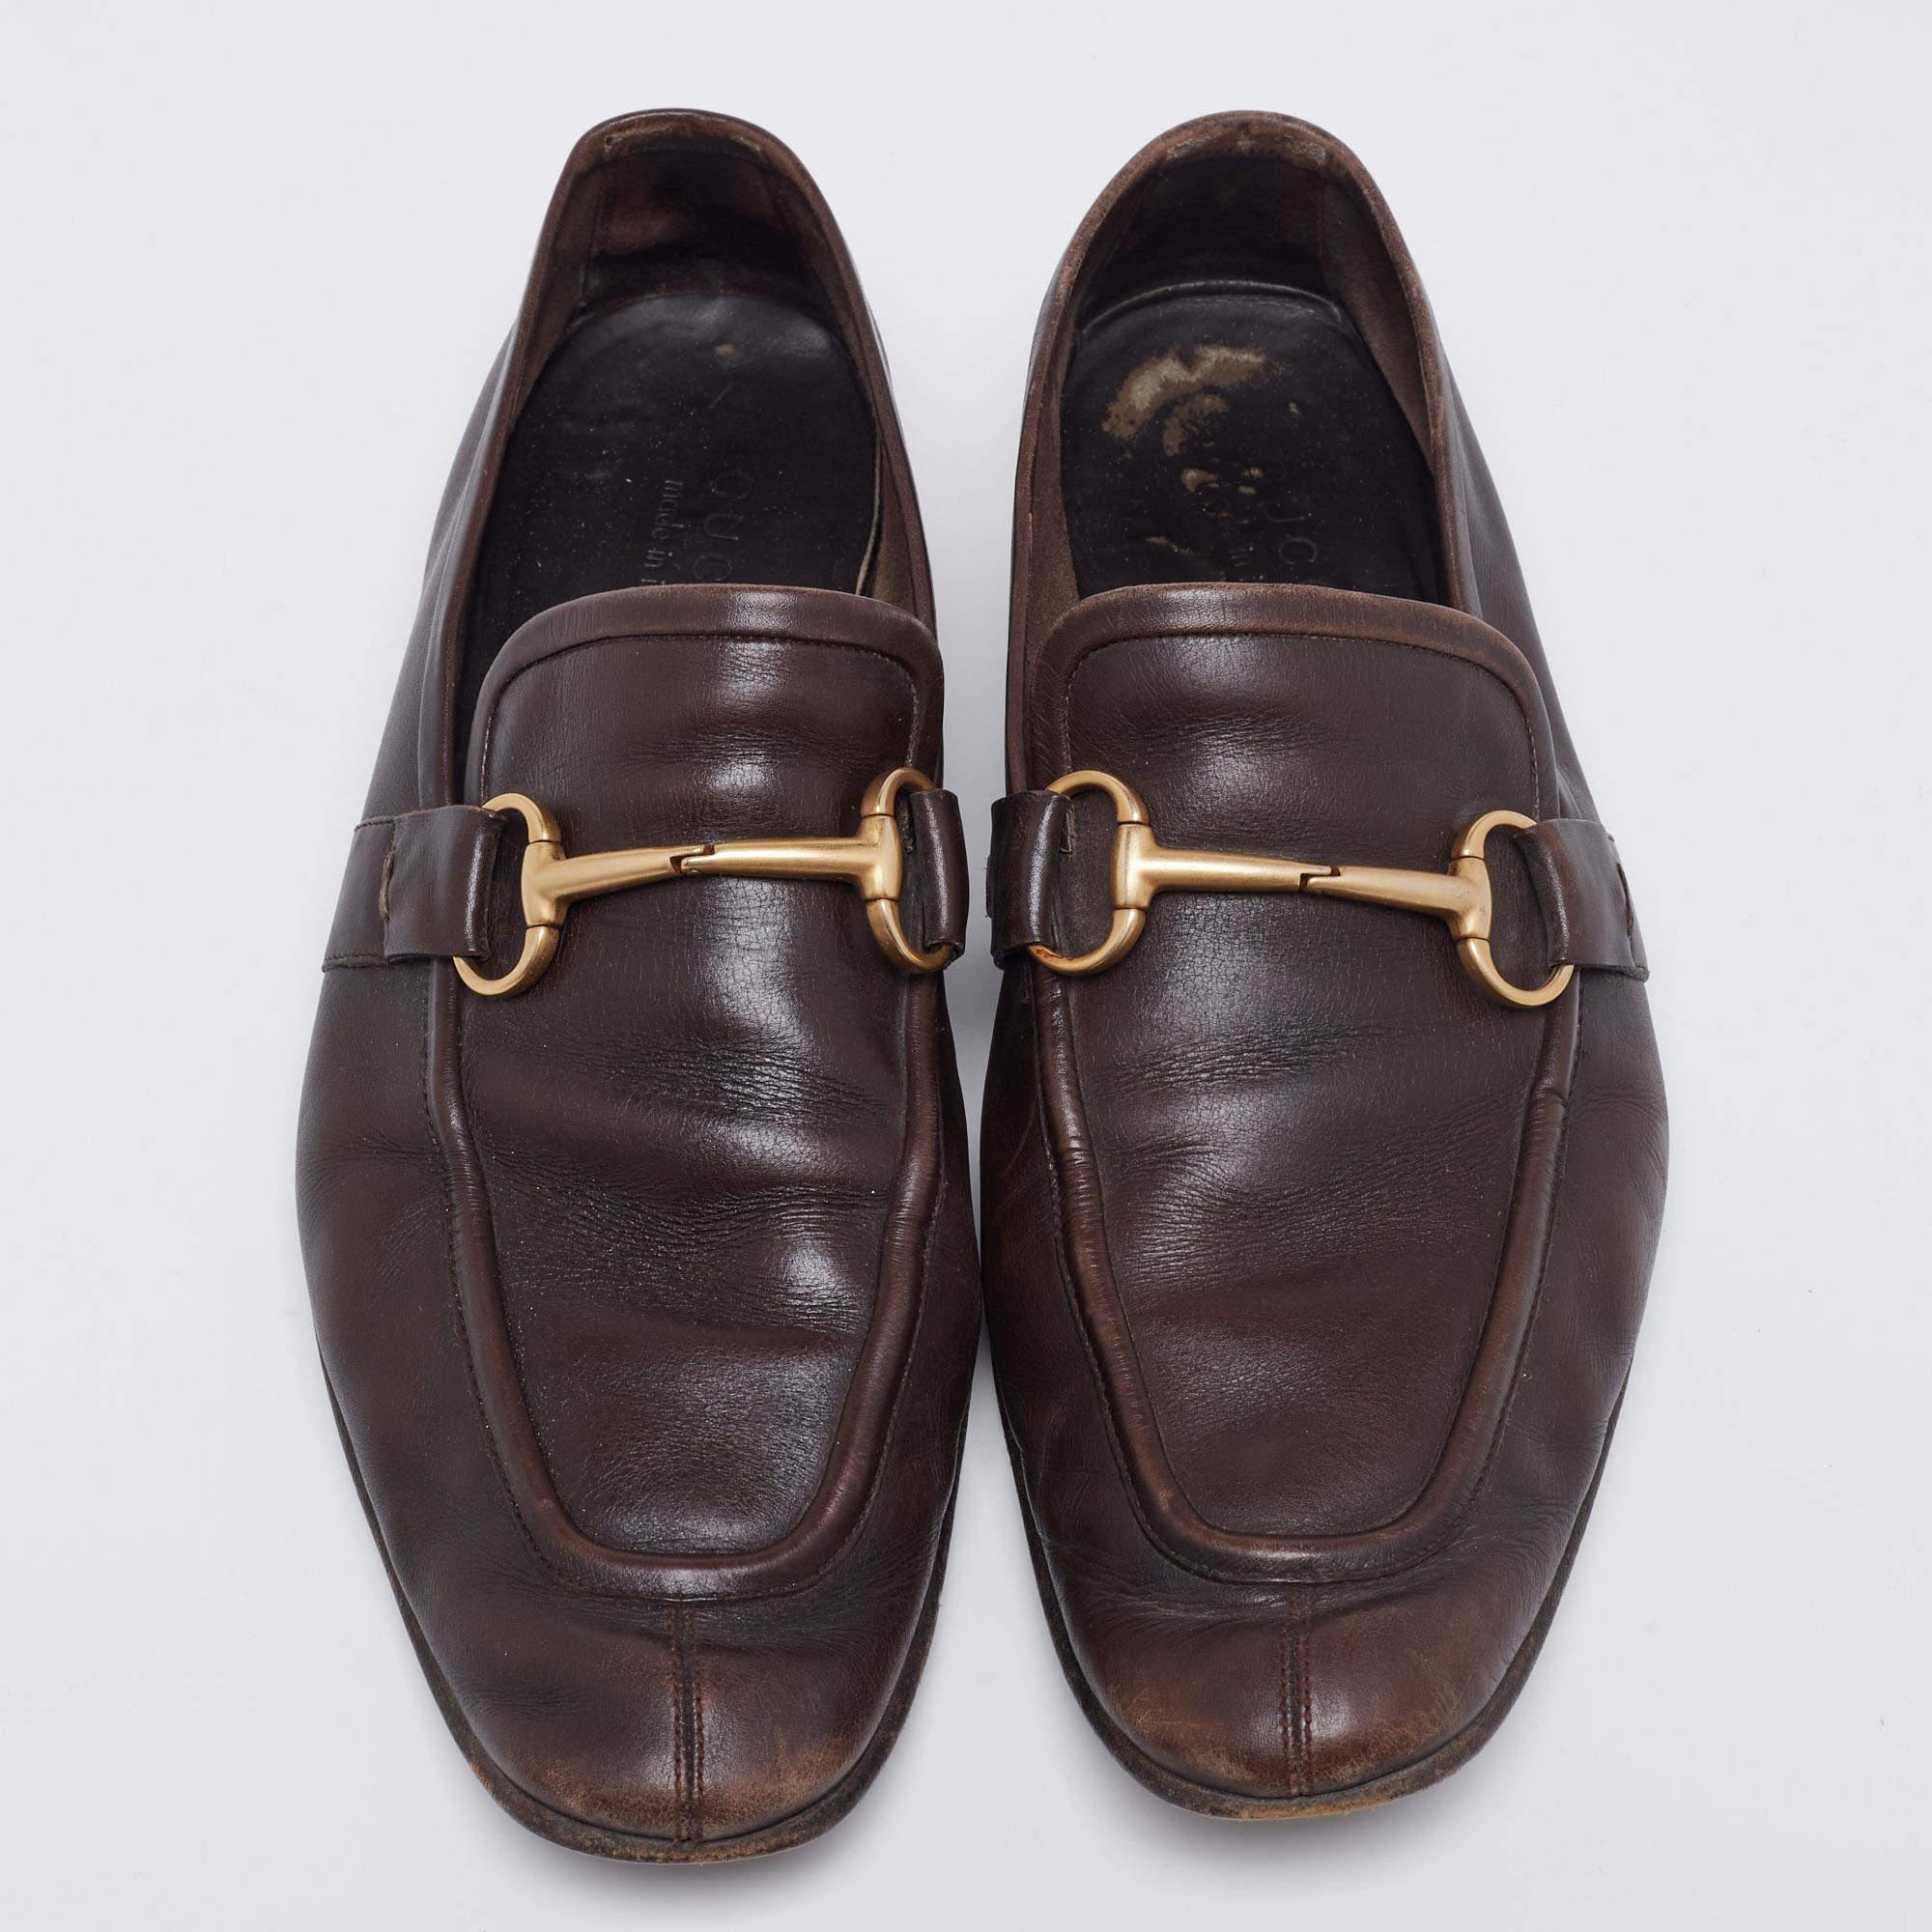 The Jordaan is a shoe that has a modern finish and a signature appeal. It has an elongated toe and the Gucci Horsebit motif gracing the uppers. This pair in dark brown is crafted from leather and sewn with utmost care to envelop your feet with